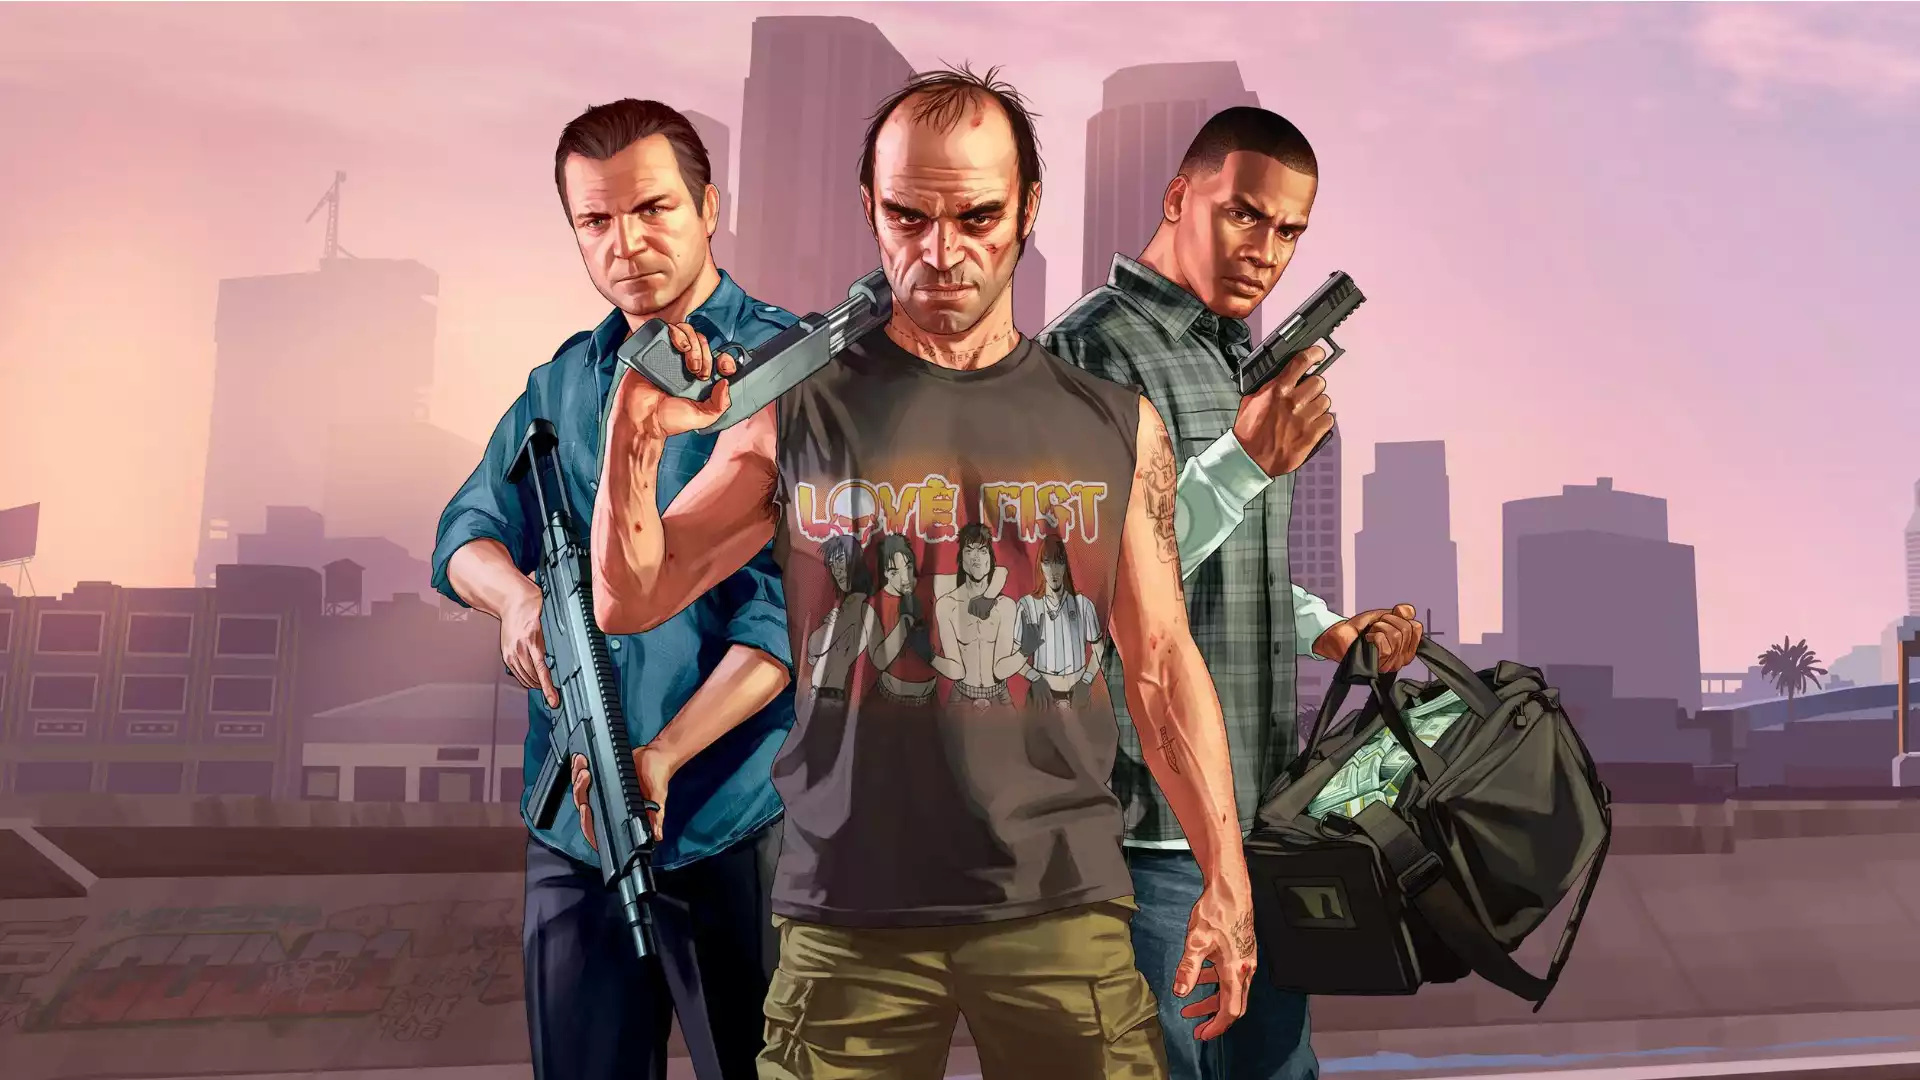 Grand Theft Auto 5 PS5 Release Date Delayed In Brand-New Trailer